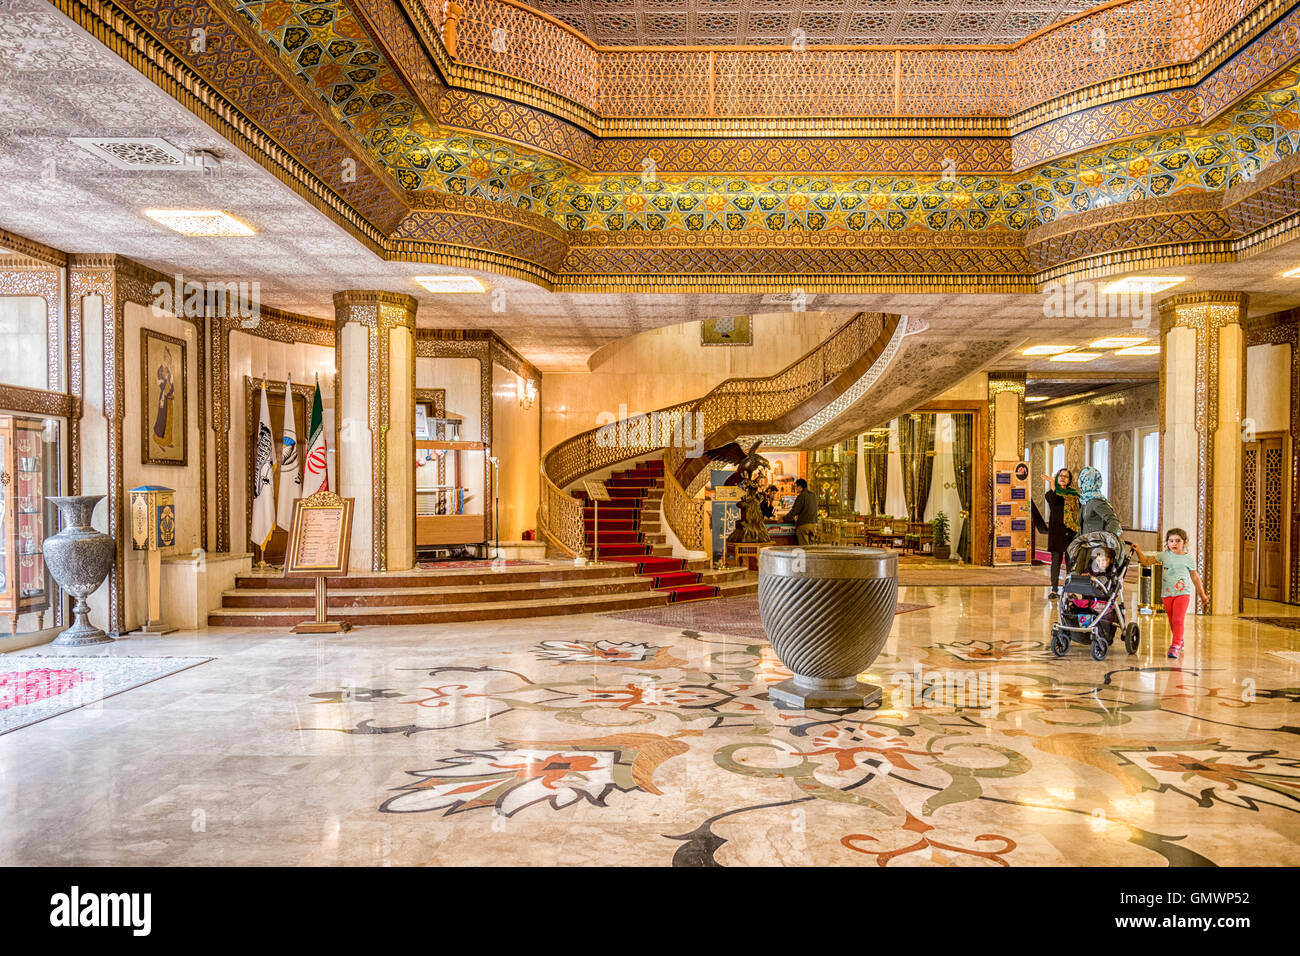 The elaborately decorated lobby of the Abbasi Hotel in ...